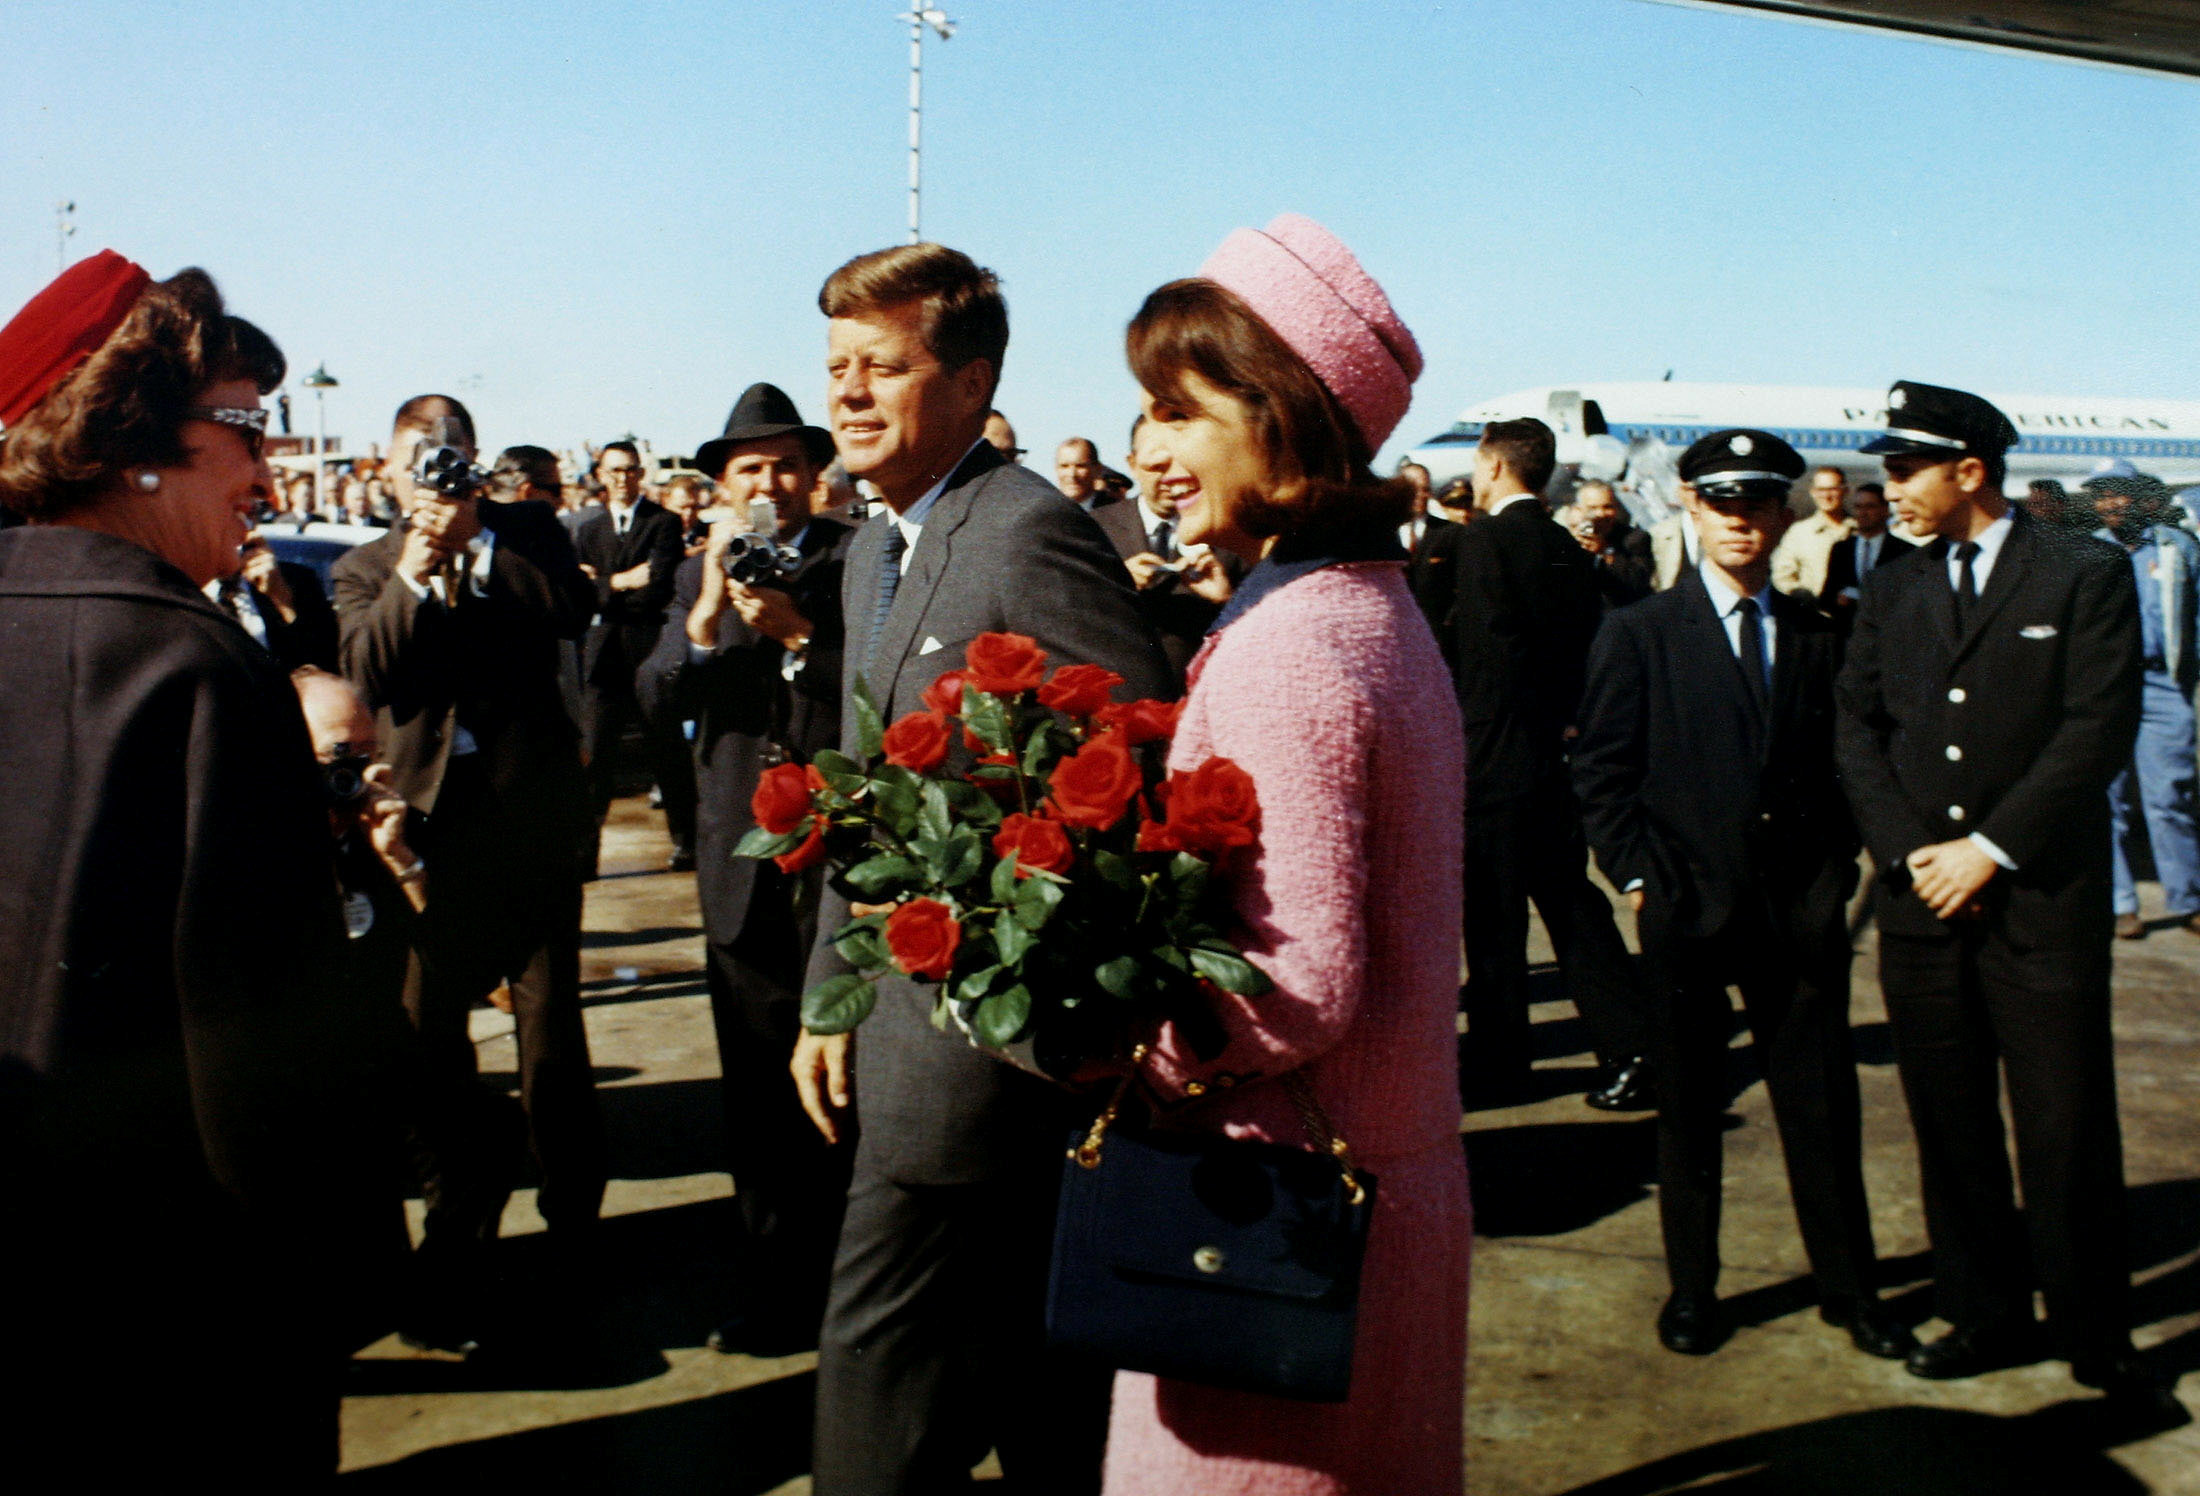 <strong>U.S. President John F. Kennedy and first lady Jacqueline Bouvier Kennedy arrive at Love Field in Dallas, Texas less than an hour before his assassination in this November 22, 1963 photo by White House photographer Cecil Stoughton obtained from the John F. Kennedy Presidential Library in Boston.&nbsp;</strong>